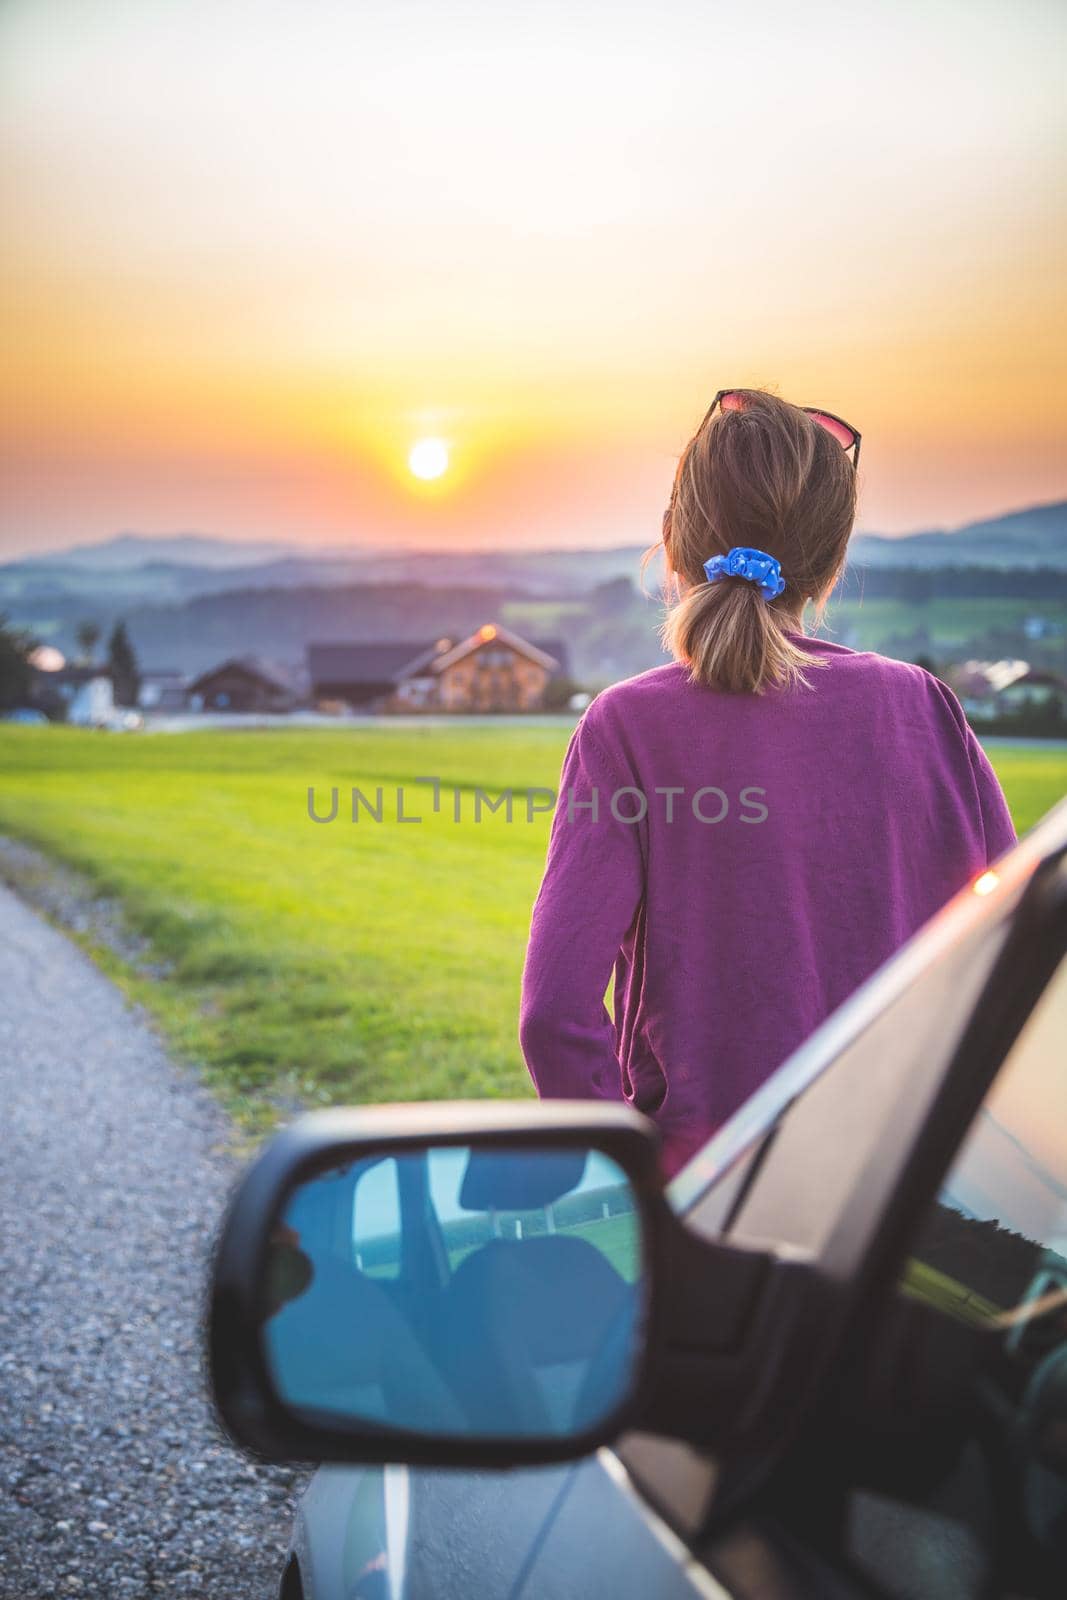 Young woman sitting on a car, enjoying the sunset